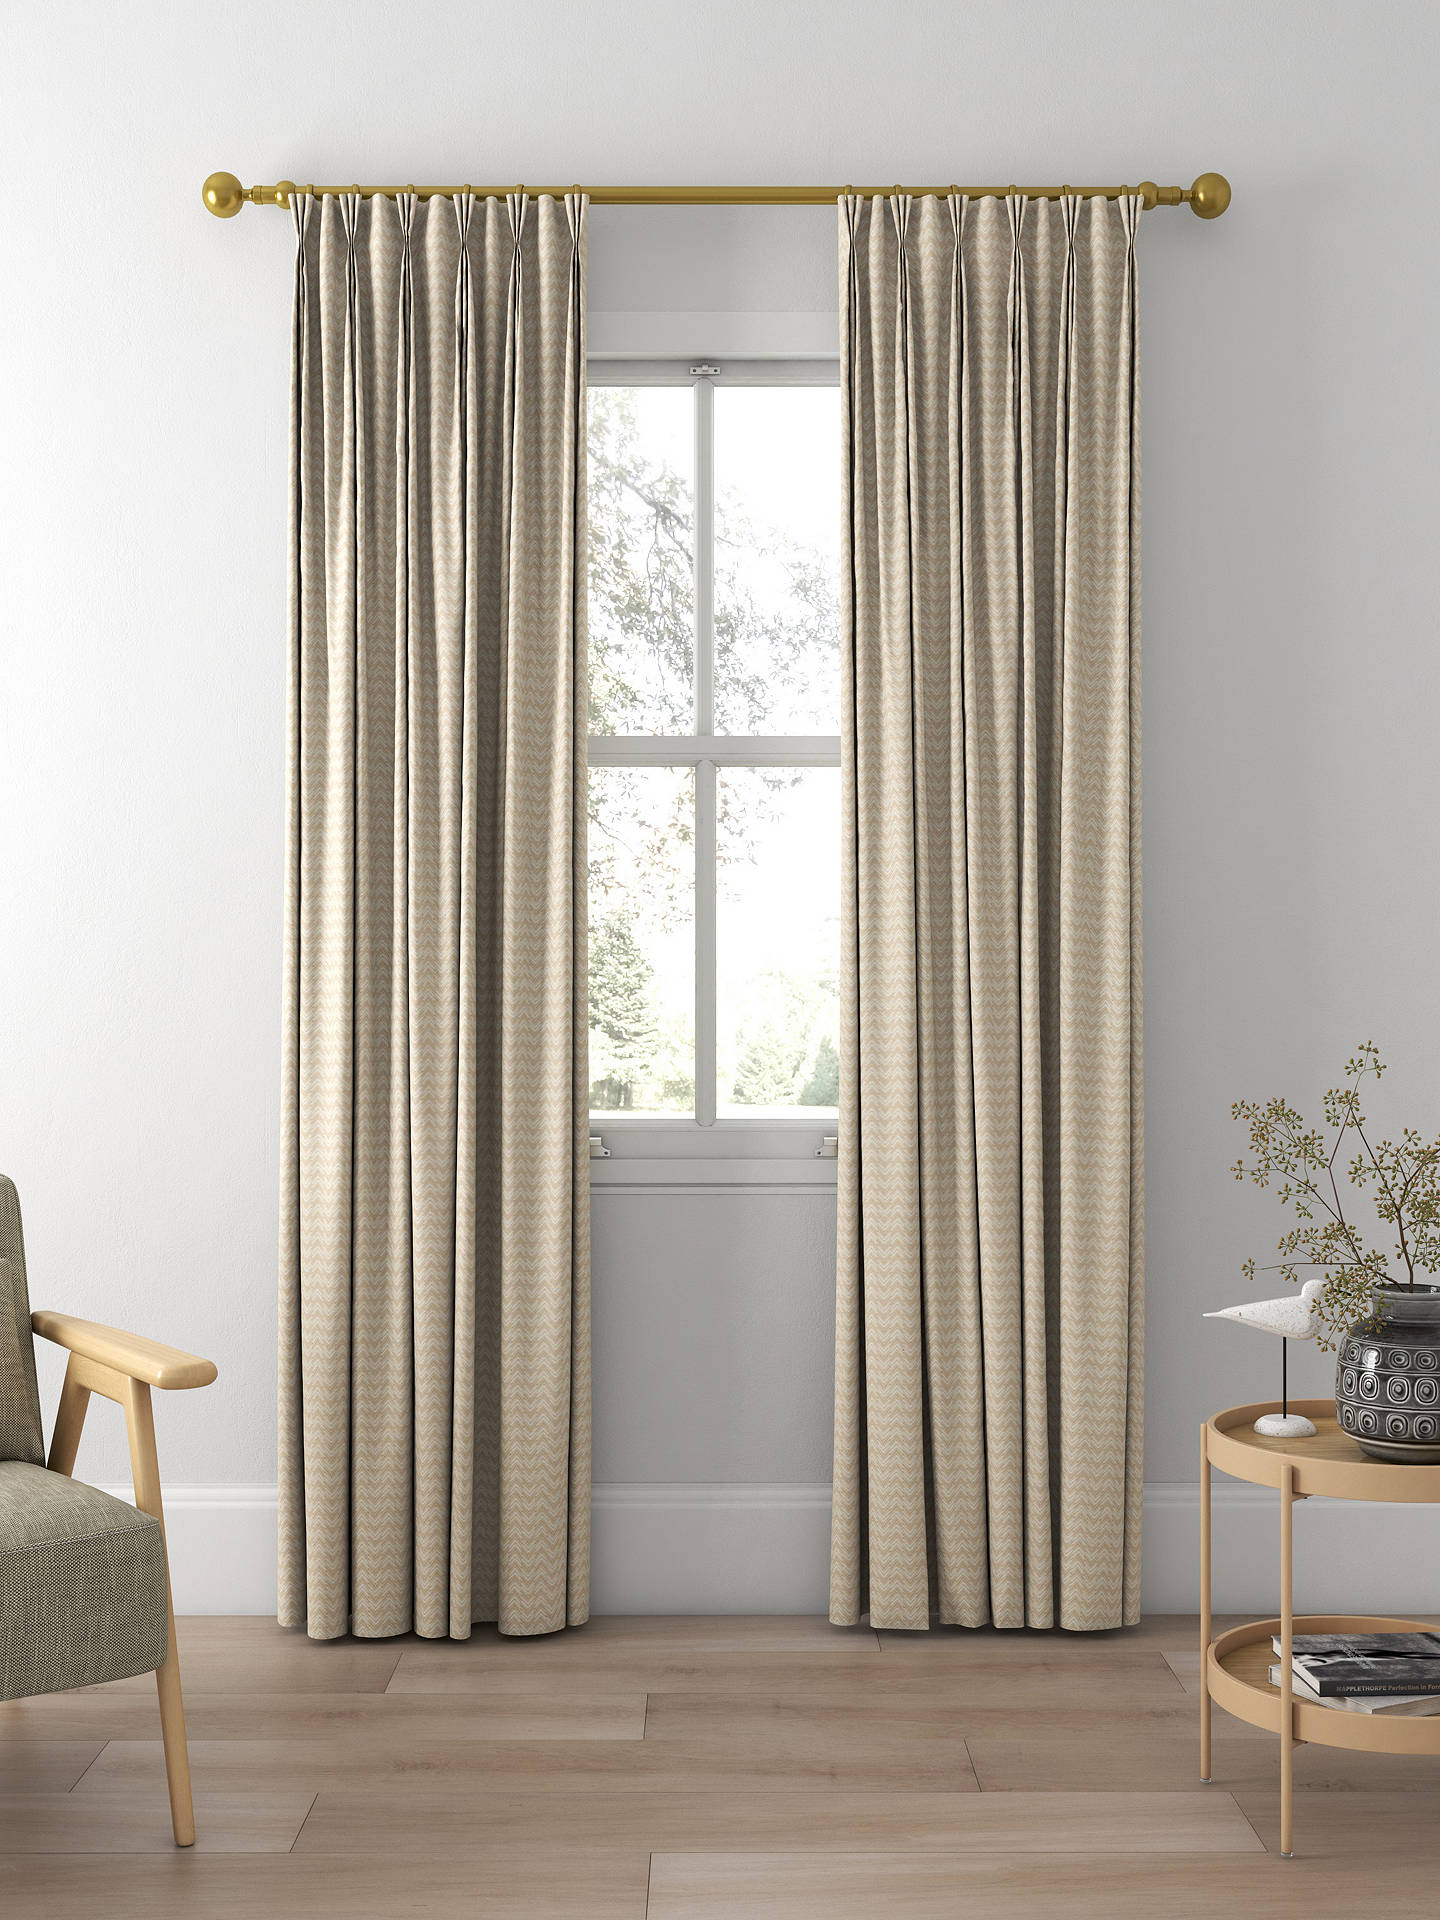 Sanderson Herring Made to Measure Curtains, Oyster